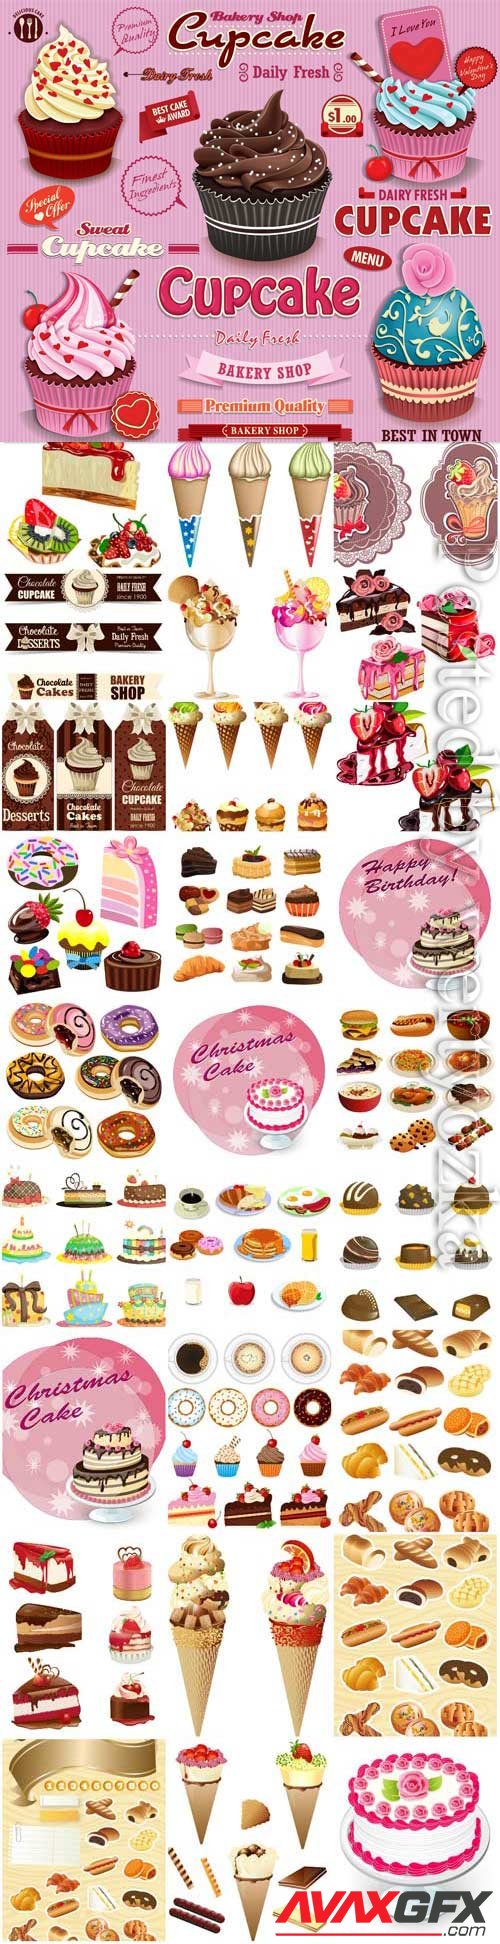 Desserts, ice cream cakes and various sweets in vector